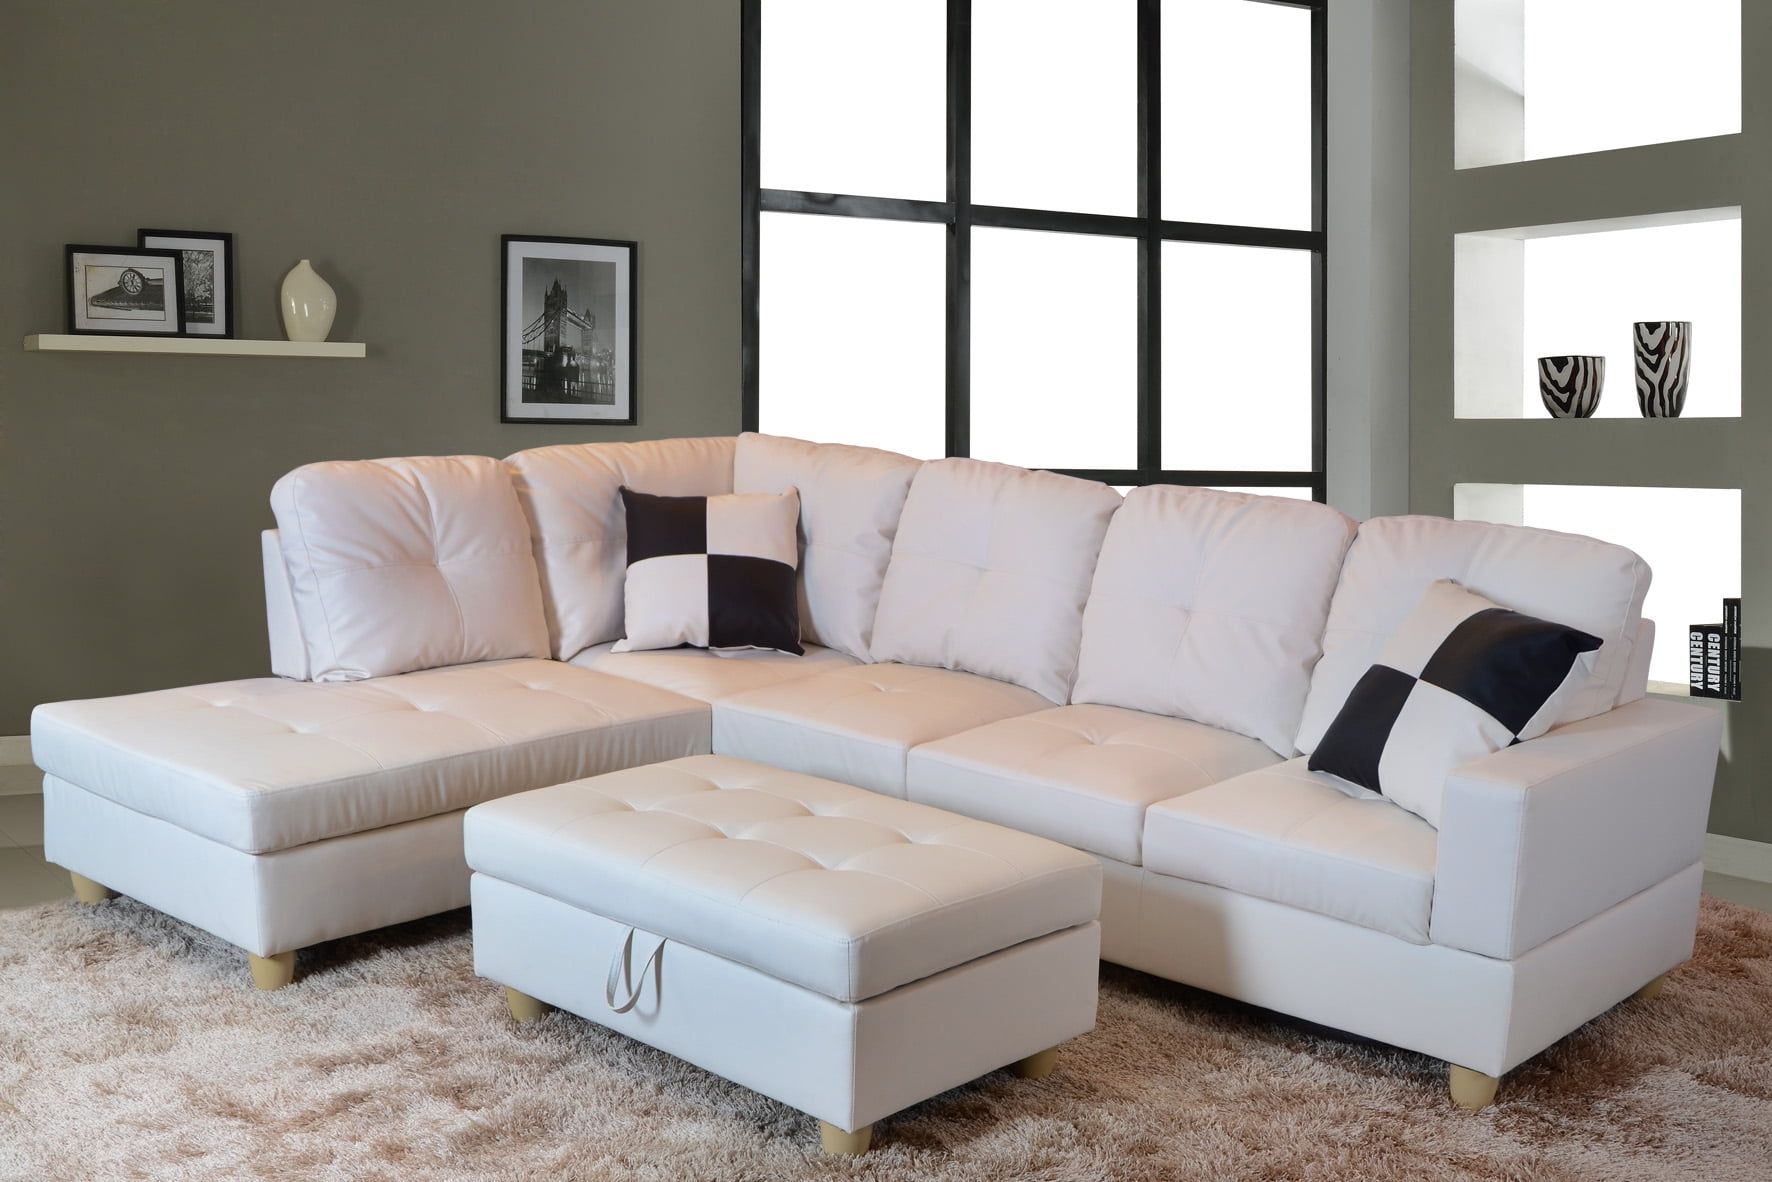 Ponliving Furniture L Shape Traditional Sectional Sofa Set With Ottoman Regarding Faux Leather Sectional Sofa Sets (Gallery 11 of 21)